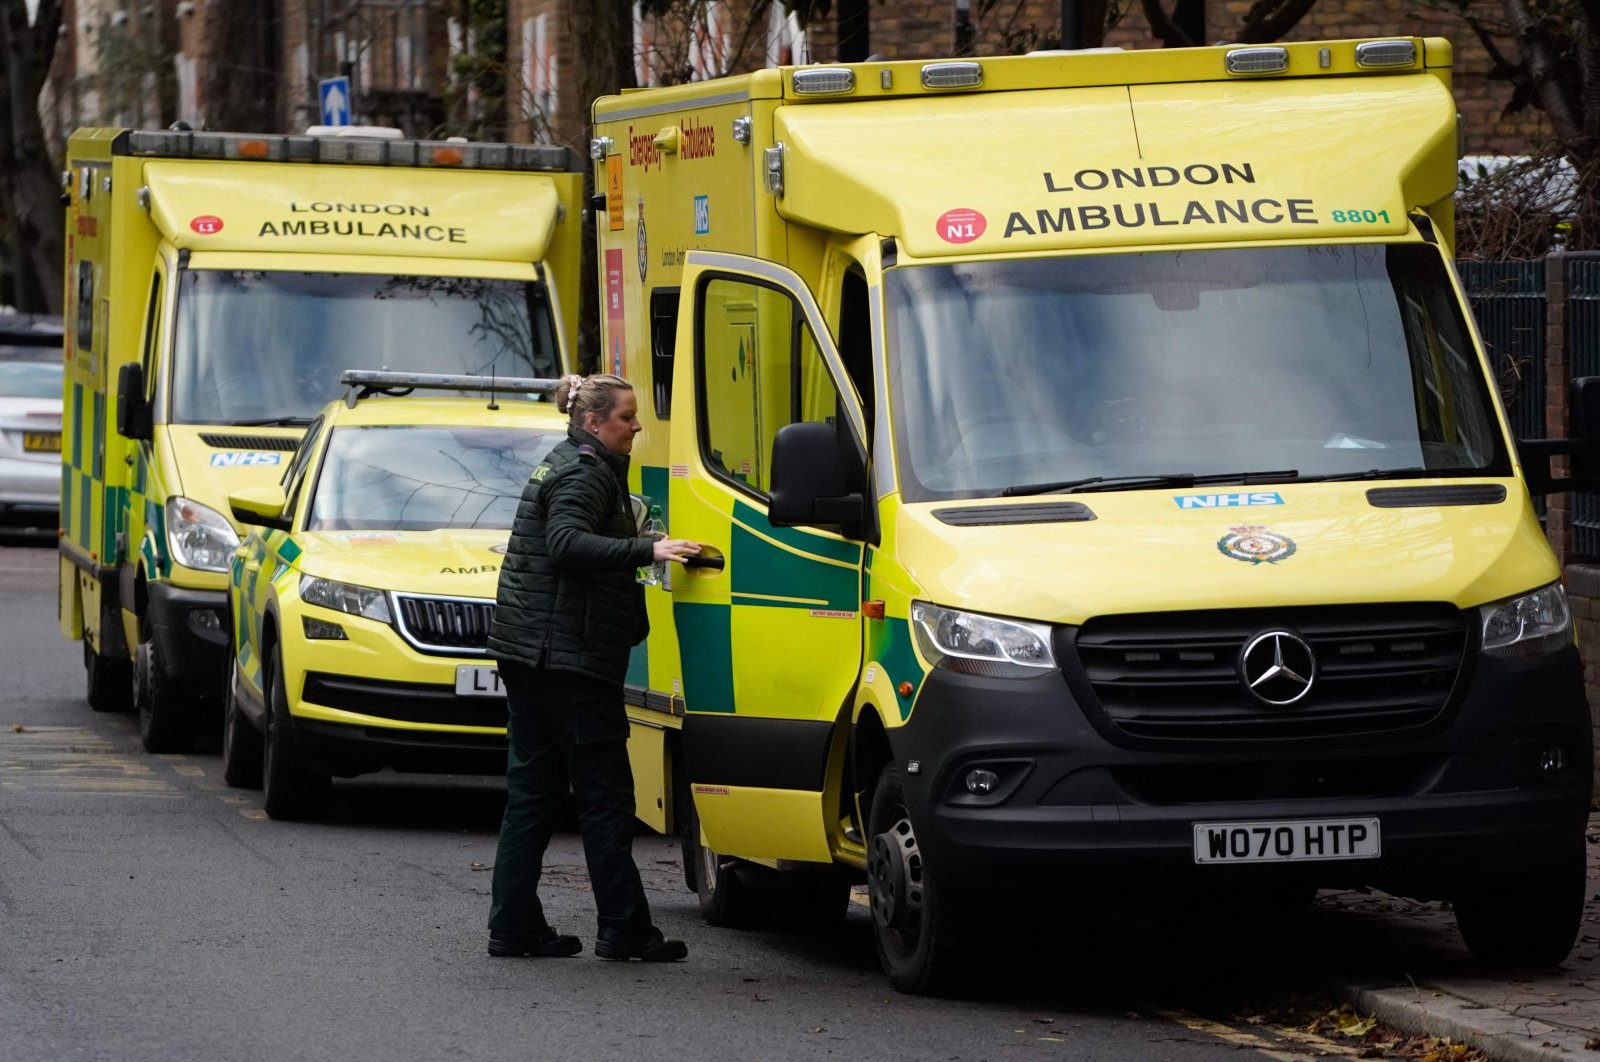 A paramedic shuts the door of an ambulance outside the Waterloo ambulance station in London, U.K., Dec. 21, 2022. (AFP Photo)